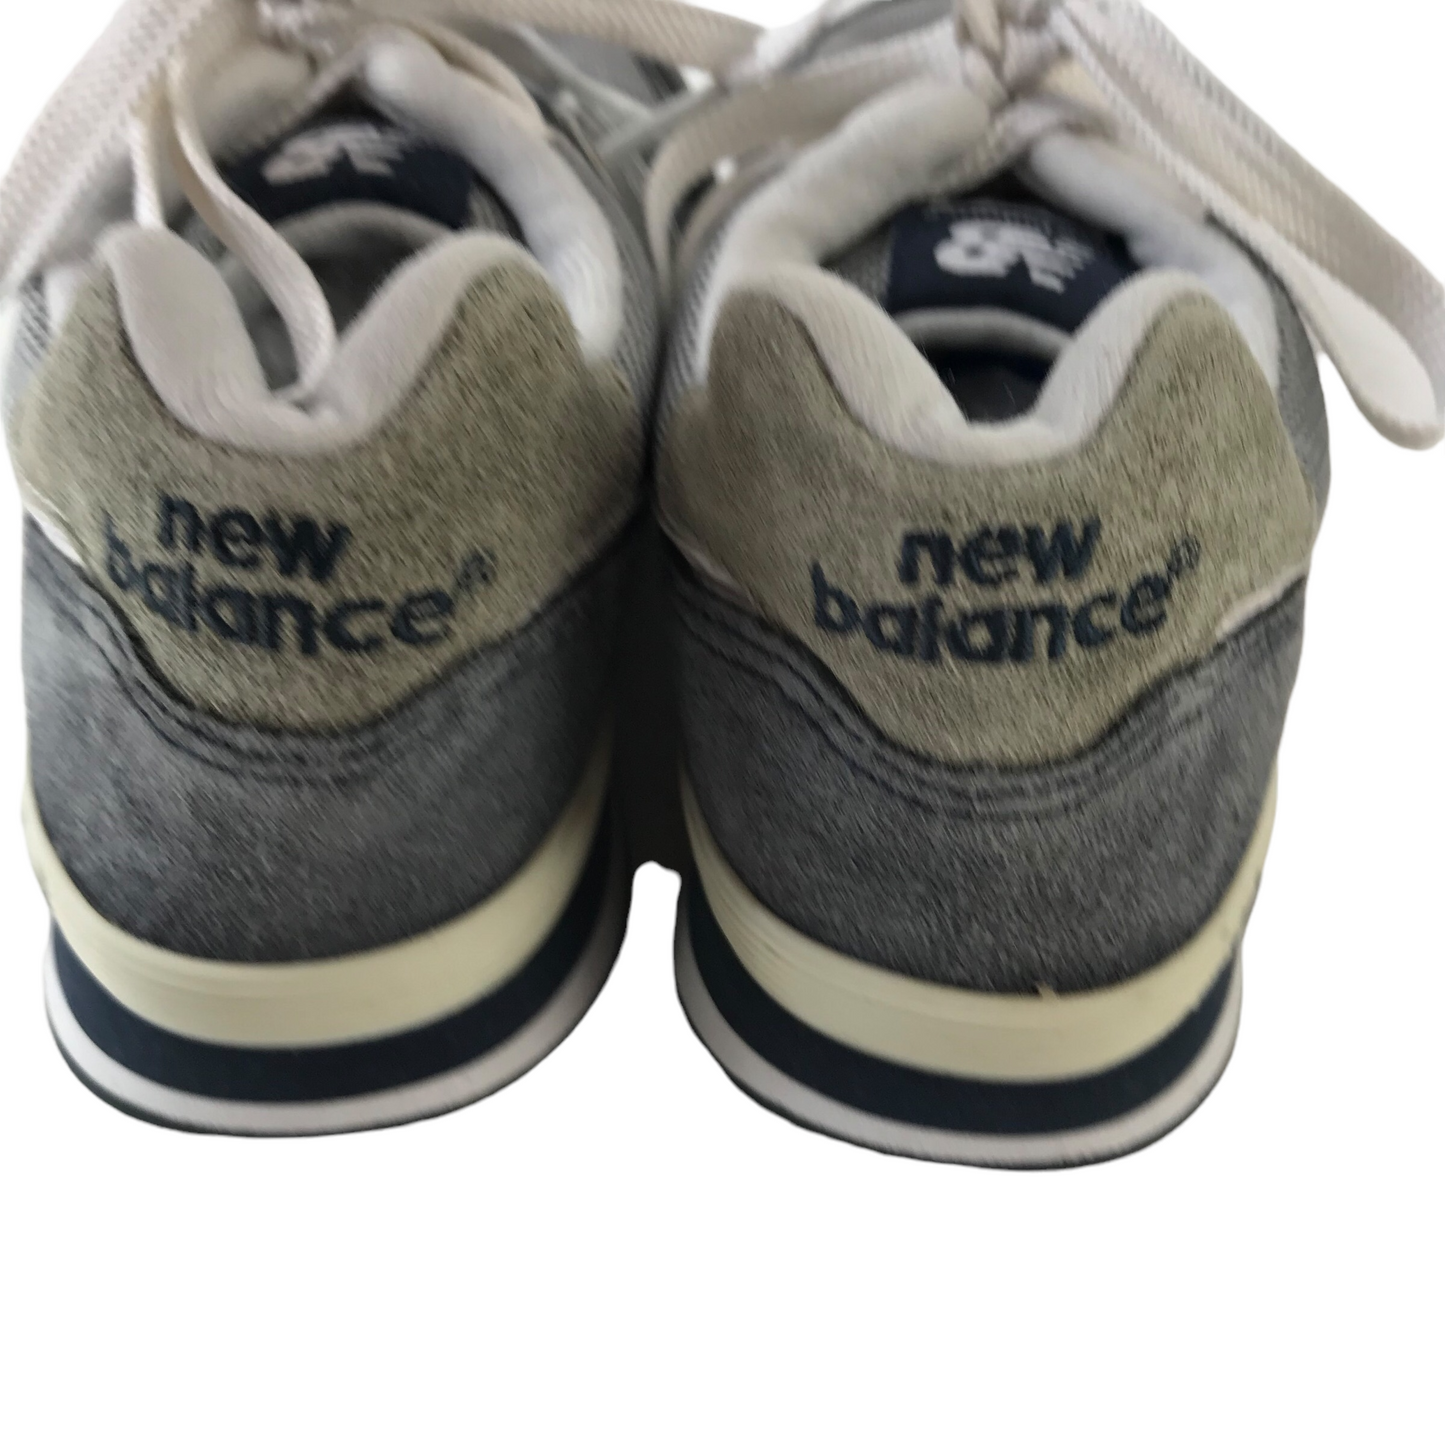 New Balance Navy Blue and Grey Trainers Size UK 3